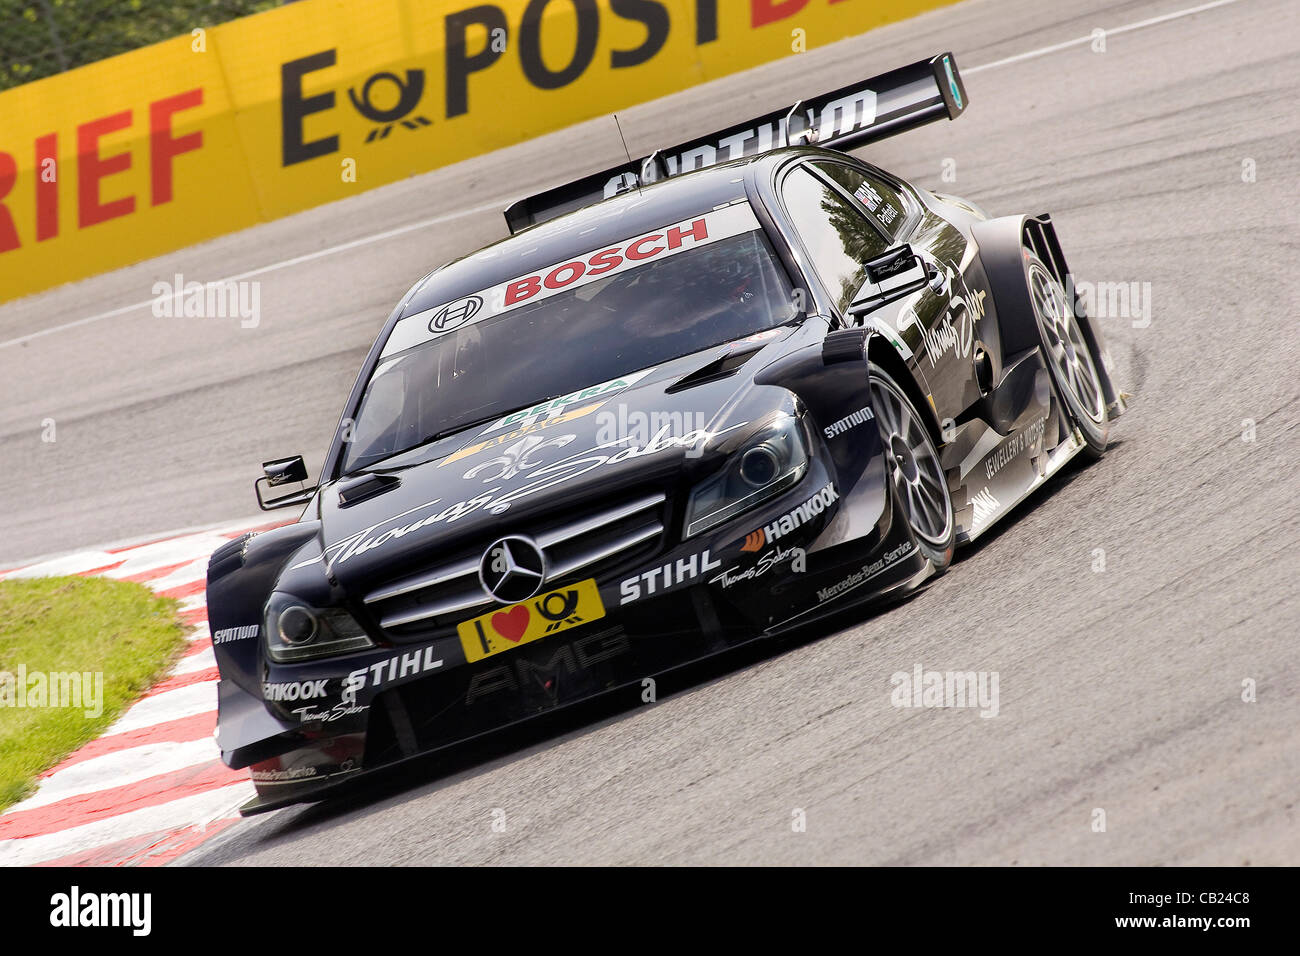 19.05.2012 Brands Hatch, Gary Paffett (GB) driving the Thomas Sabo Merdedes  AMG C-Coupe in action during Saturday's Qualifying in the 2012 DTM  Championship, Kent, England Stock Photo - Alamy